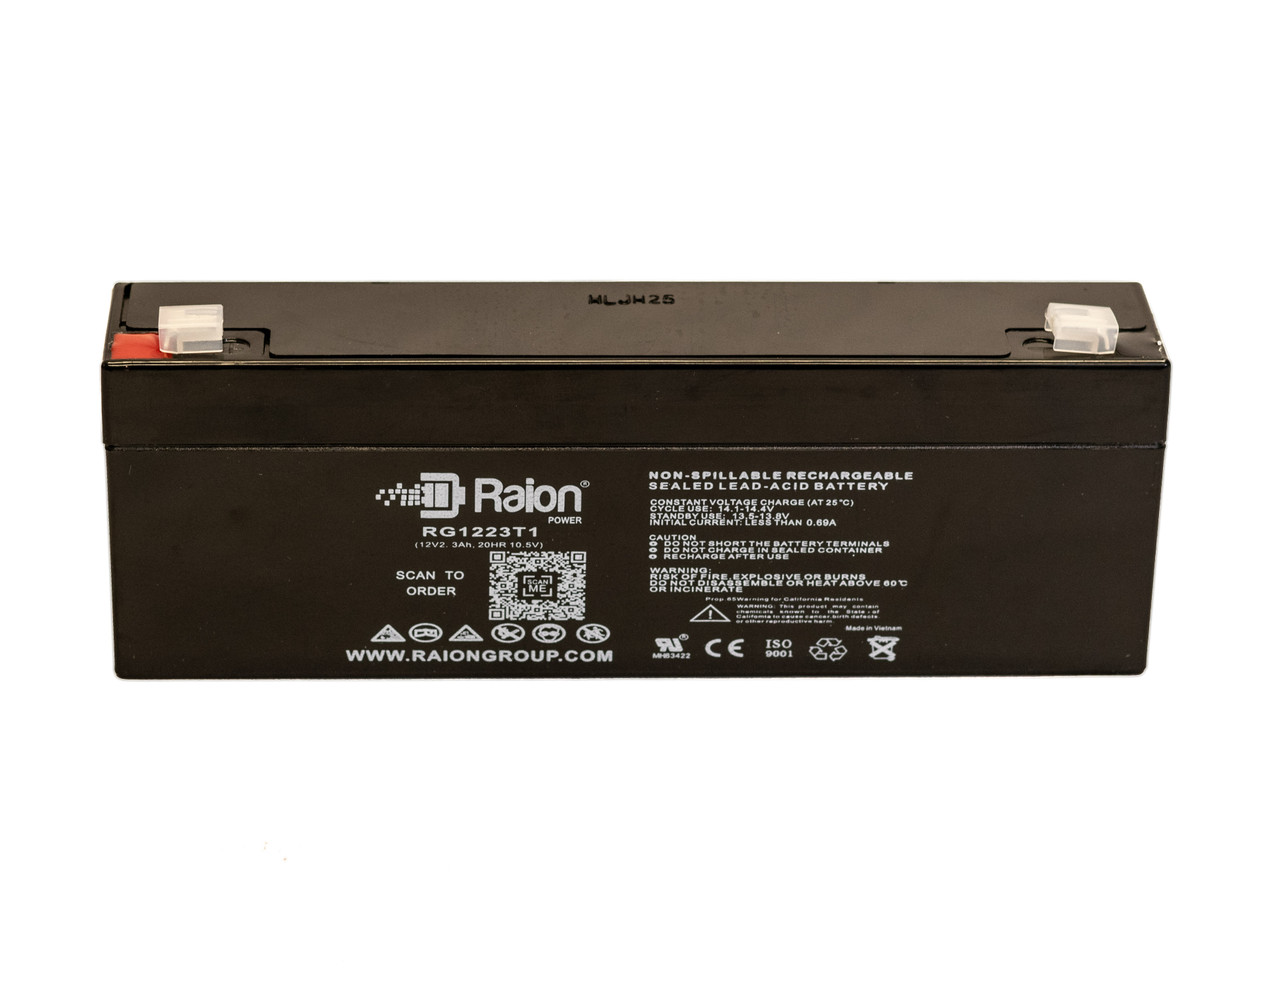 Raion Power 12V 2.3Ah SLA Battery With T1 Terminals For Datex-Ohmeda Cardio Cap/5 Anesthesia Monitor